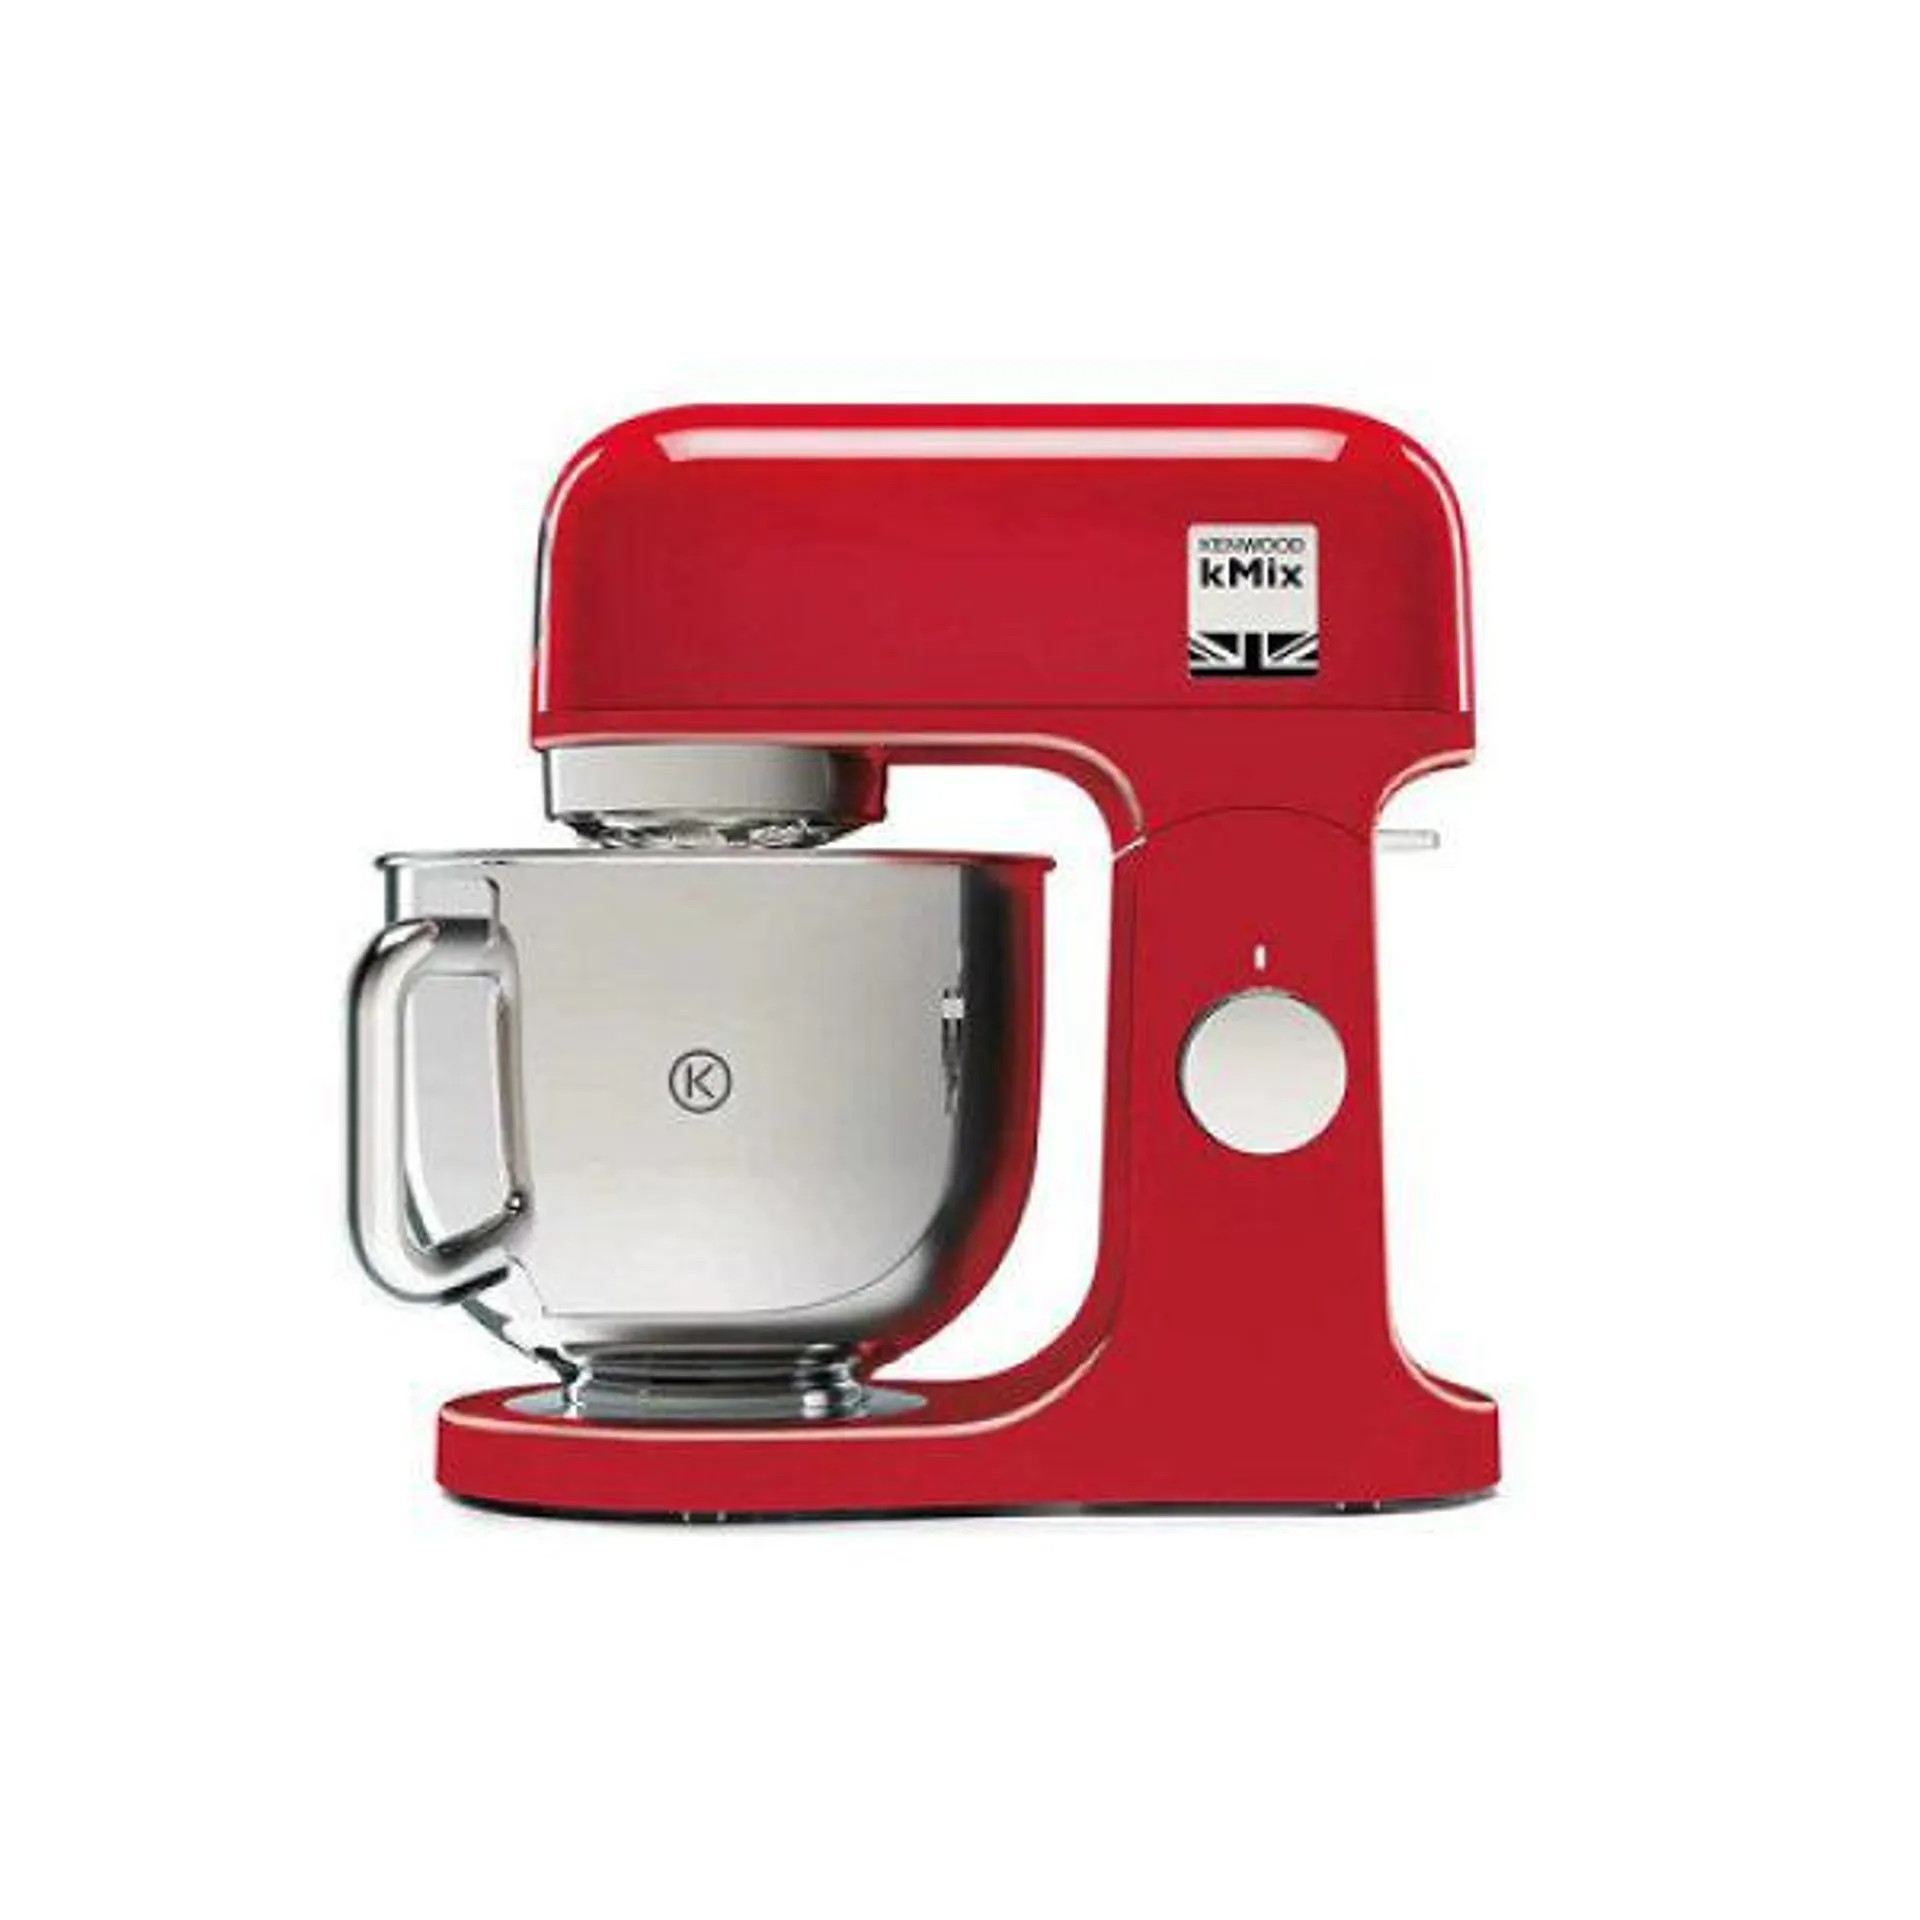 Kenwood kMix Stand Mixer with Stainless Steel Bowl-Red